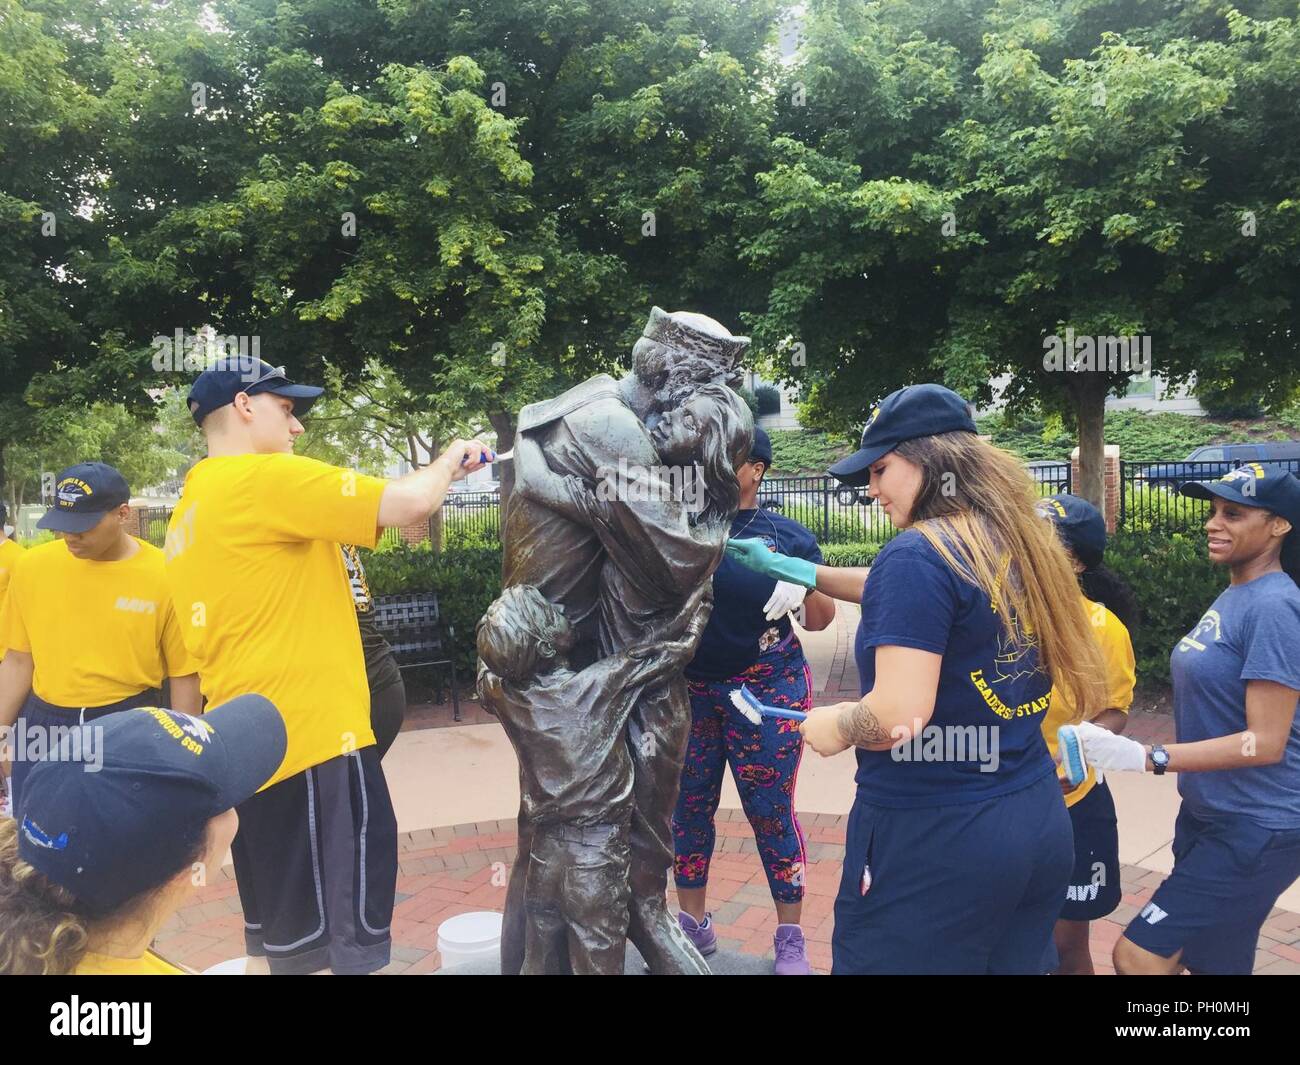 NORFOLK, Virginia (June 18, 2018) Sailors assigned to the aircraft carrier USS George H.W. Bush (CVN 77) clean the “Homecoming” statue at Norfolk’s Town Point Park. As a birthday tribute to the ship’s namesake, and representing his famous “Thousand Points of Light” speech, approximately 1,000 GHWB crew members took part in one of the largest single-day community relation (COMREL) events at 44 different locations throughout the Hampton Roads area. George H.W. Bush turned 94 on June 12. Stock Photo